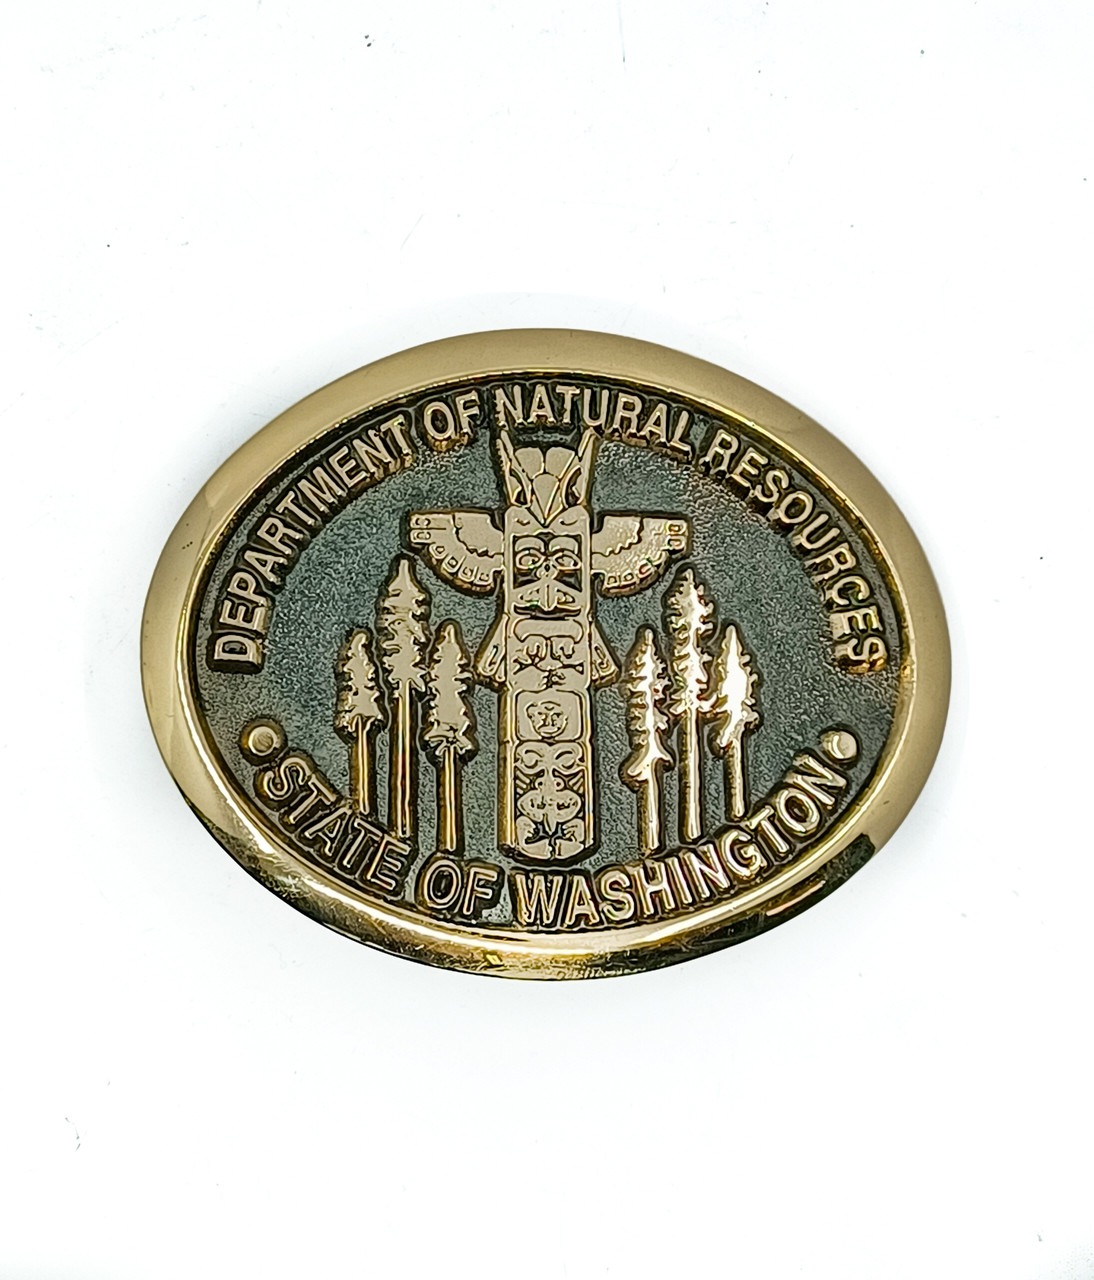 Washington Department of Natural Resources Buckle (Old)